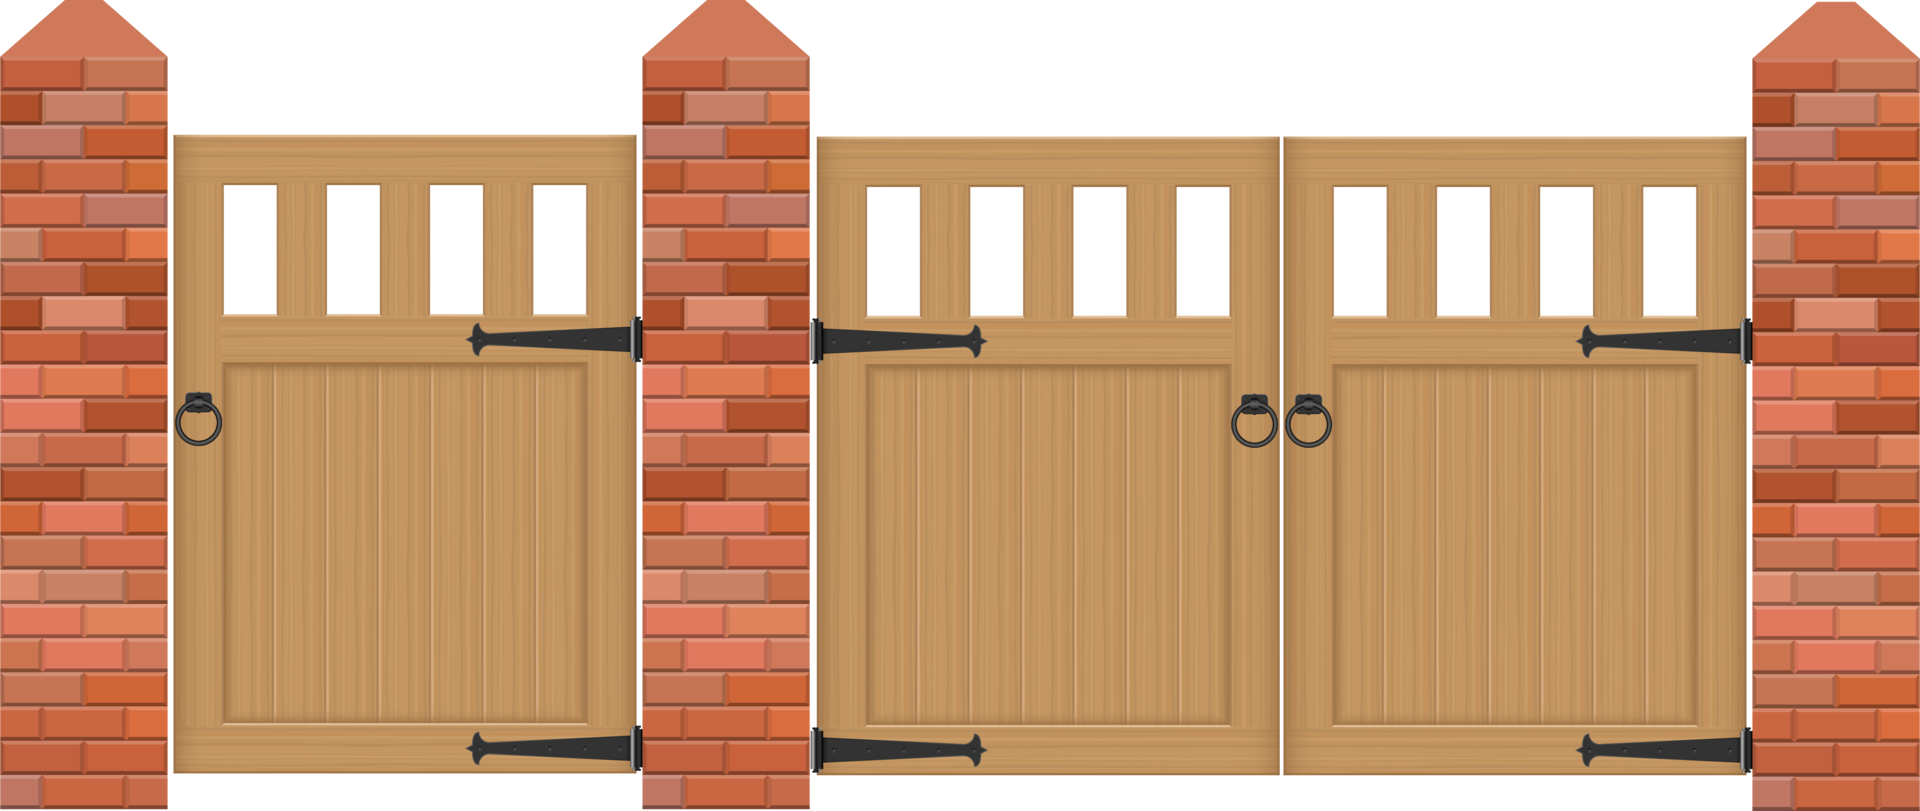 Brick fence with wooden gate vector illustration png